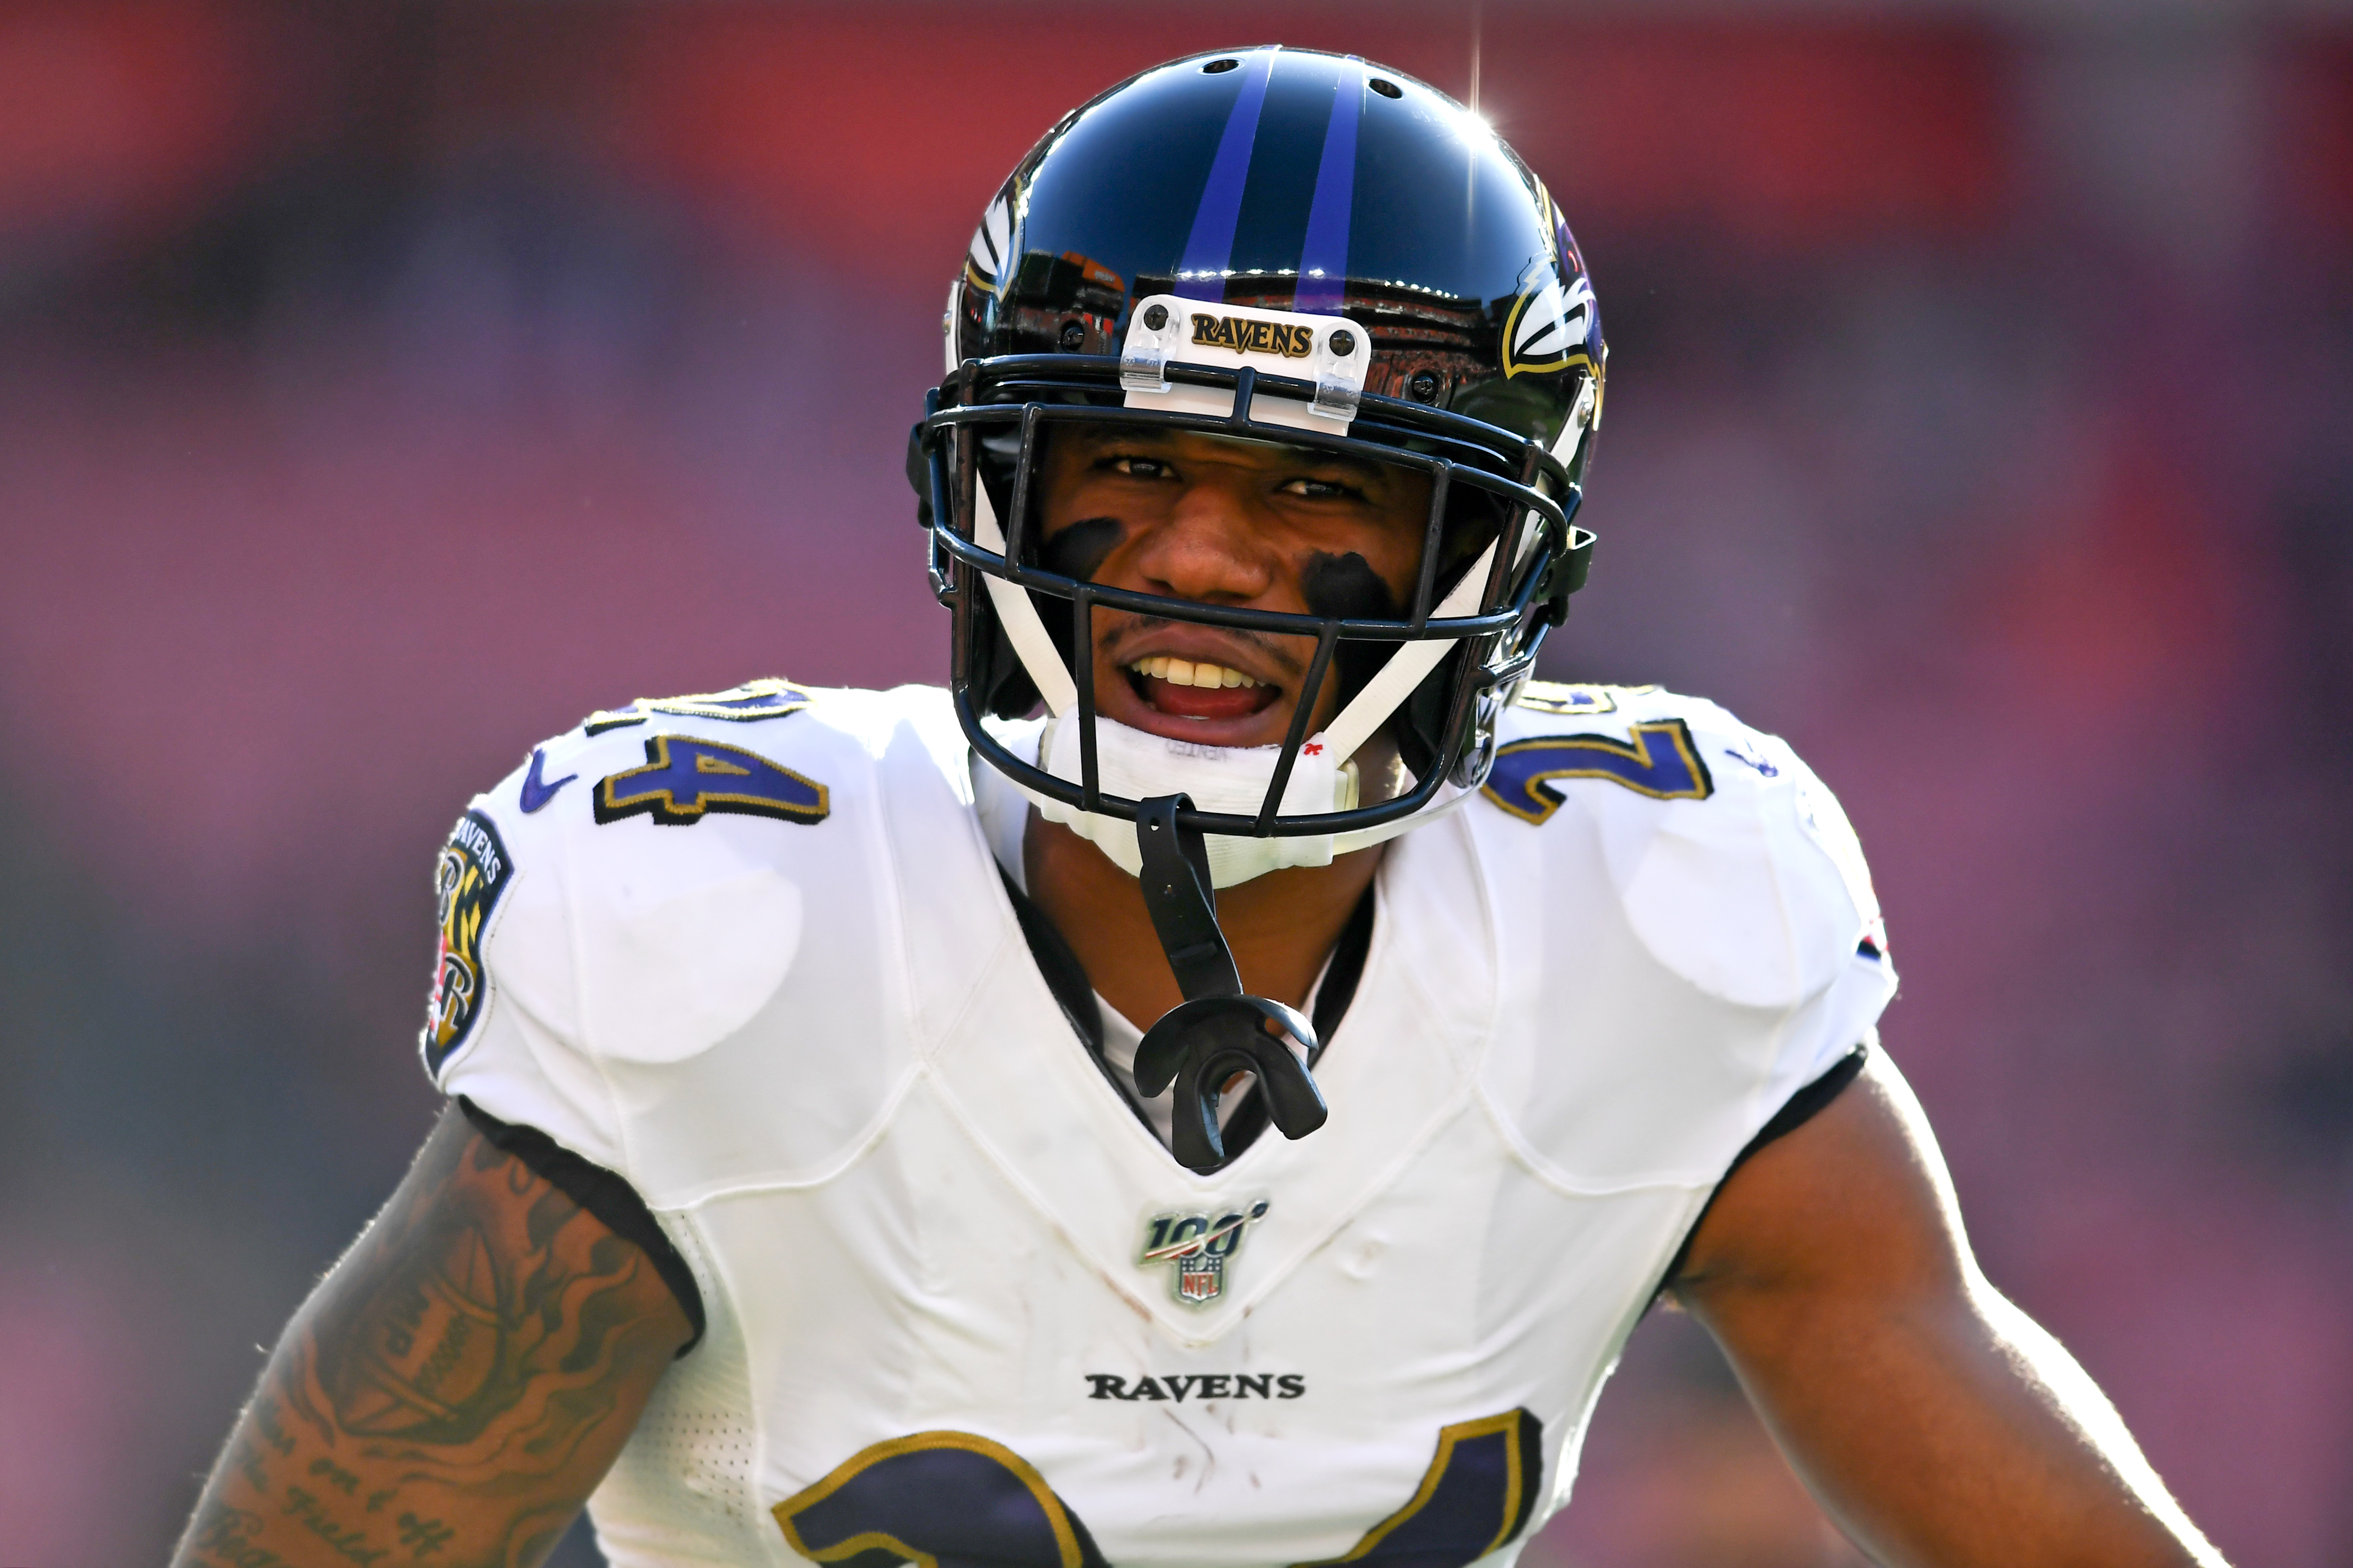 Ravens cornerback Marcus Peters reacts during game against the Browns